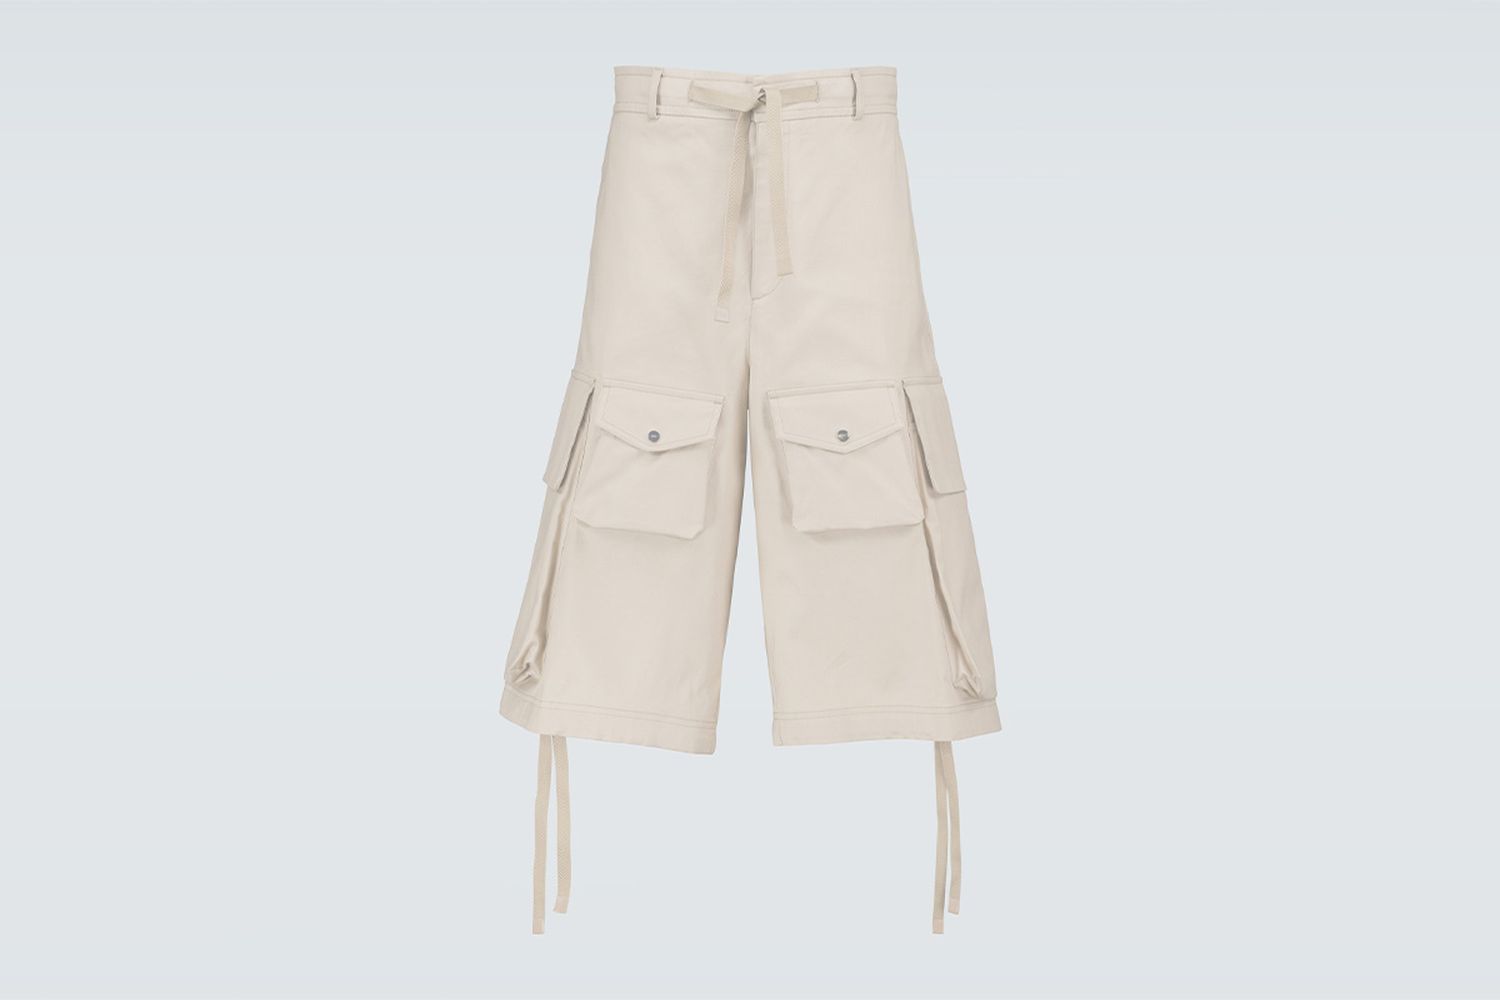 Shop 10 of the Best Luxury Shorts to Wear in 2022 Here